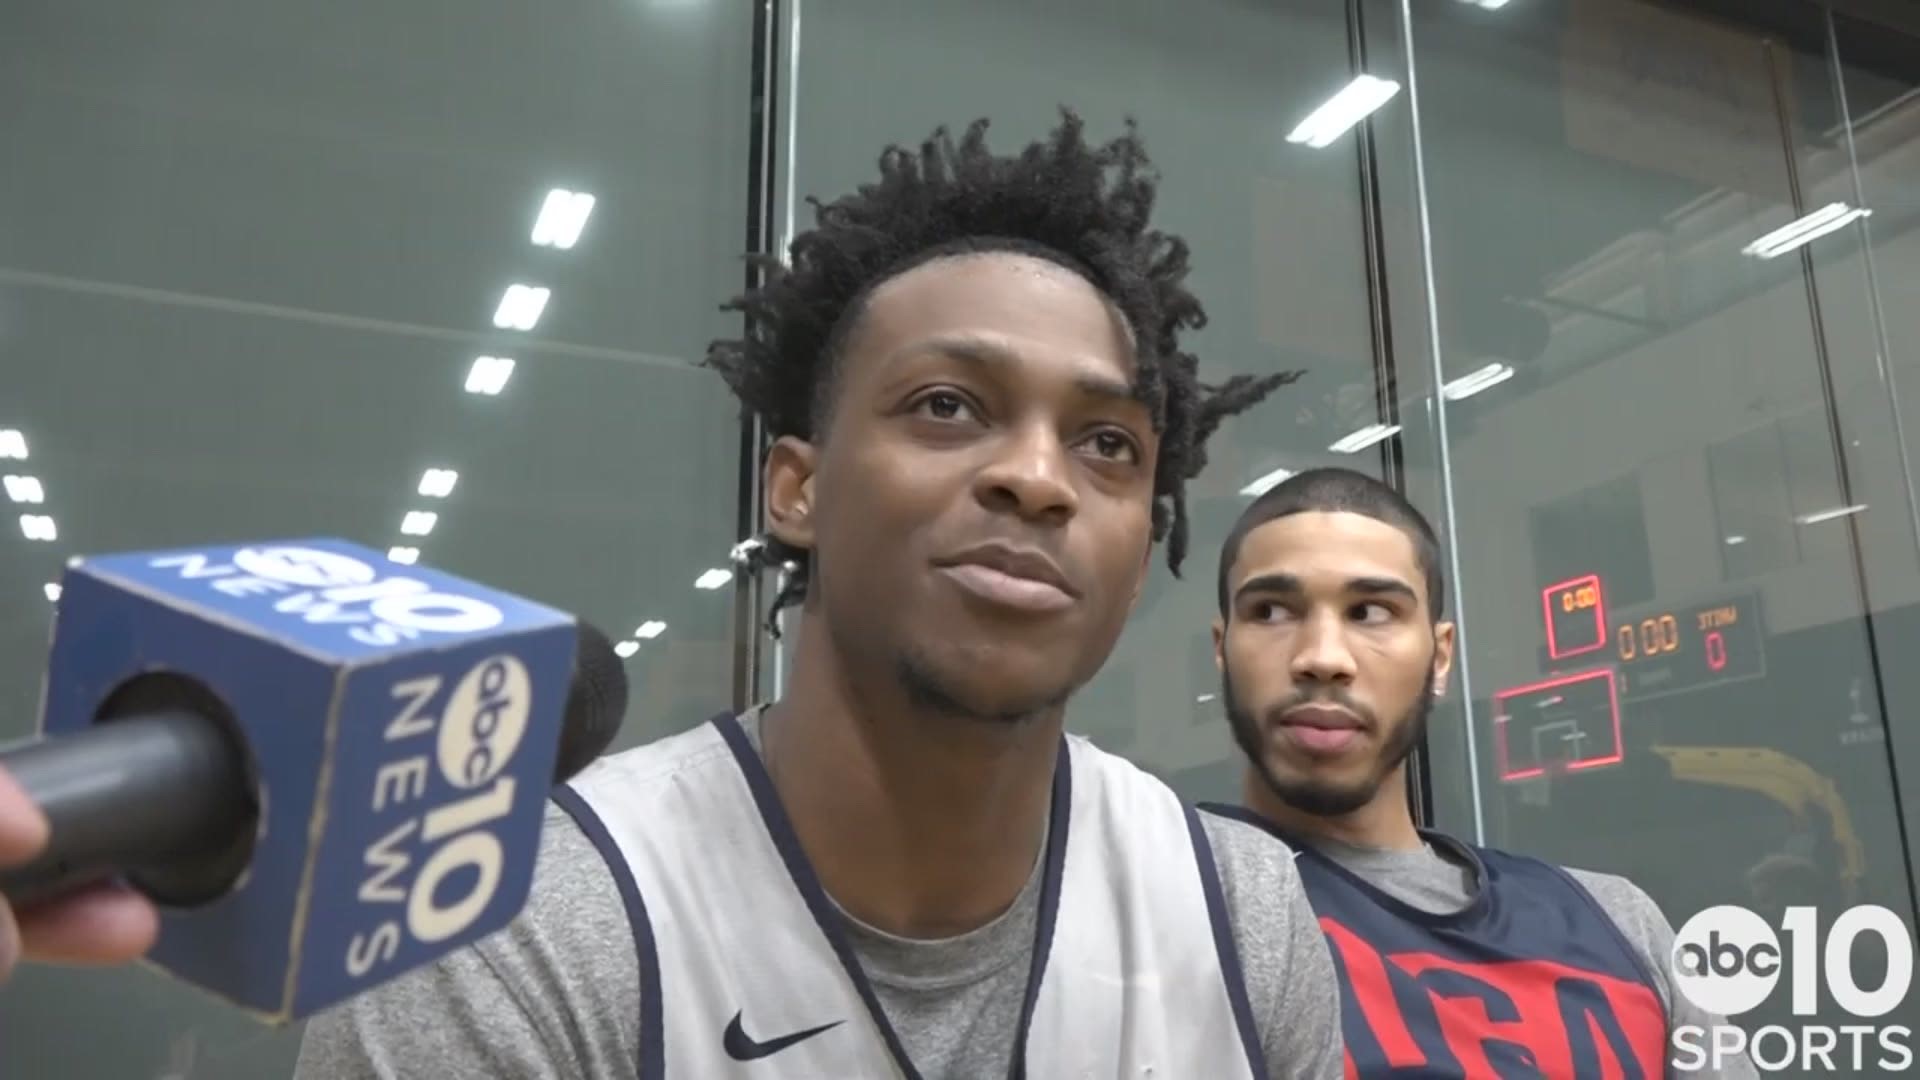 De'Aaron Fox talks about USA Basketball's training camp shifting to Los Angeles, his performance in the scrimmage in Las Vegas, his teammate Marvin Bagley III deciding to leave Team USA and the lack of nationally televised games for his Sacramento Kings in the upcoming 2019-20 NBA season.